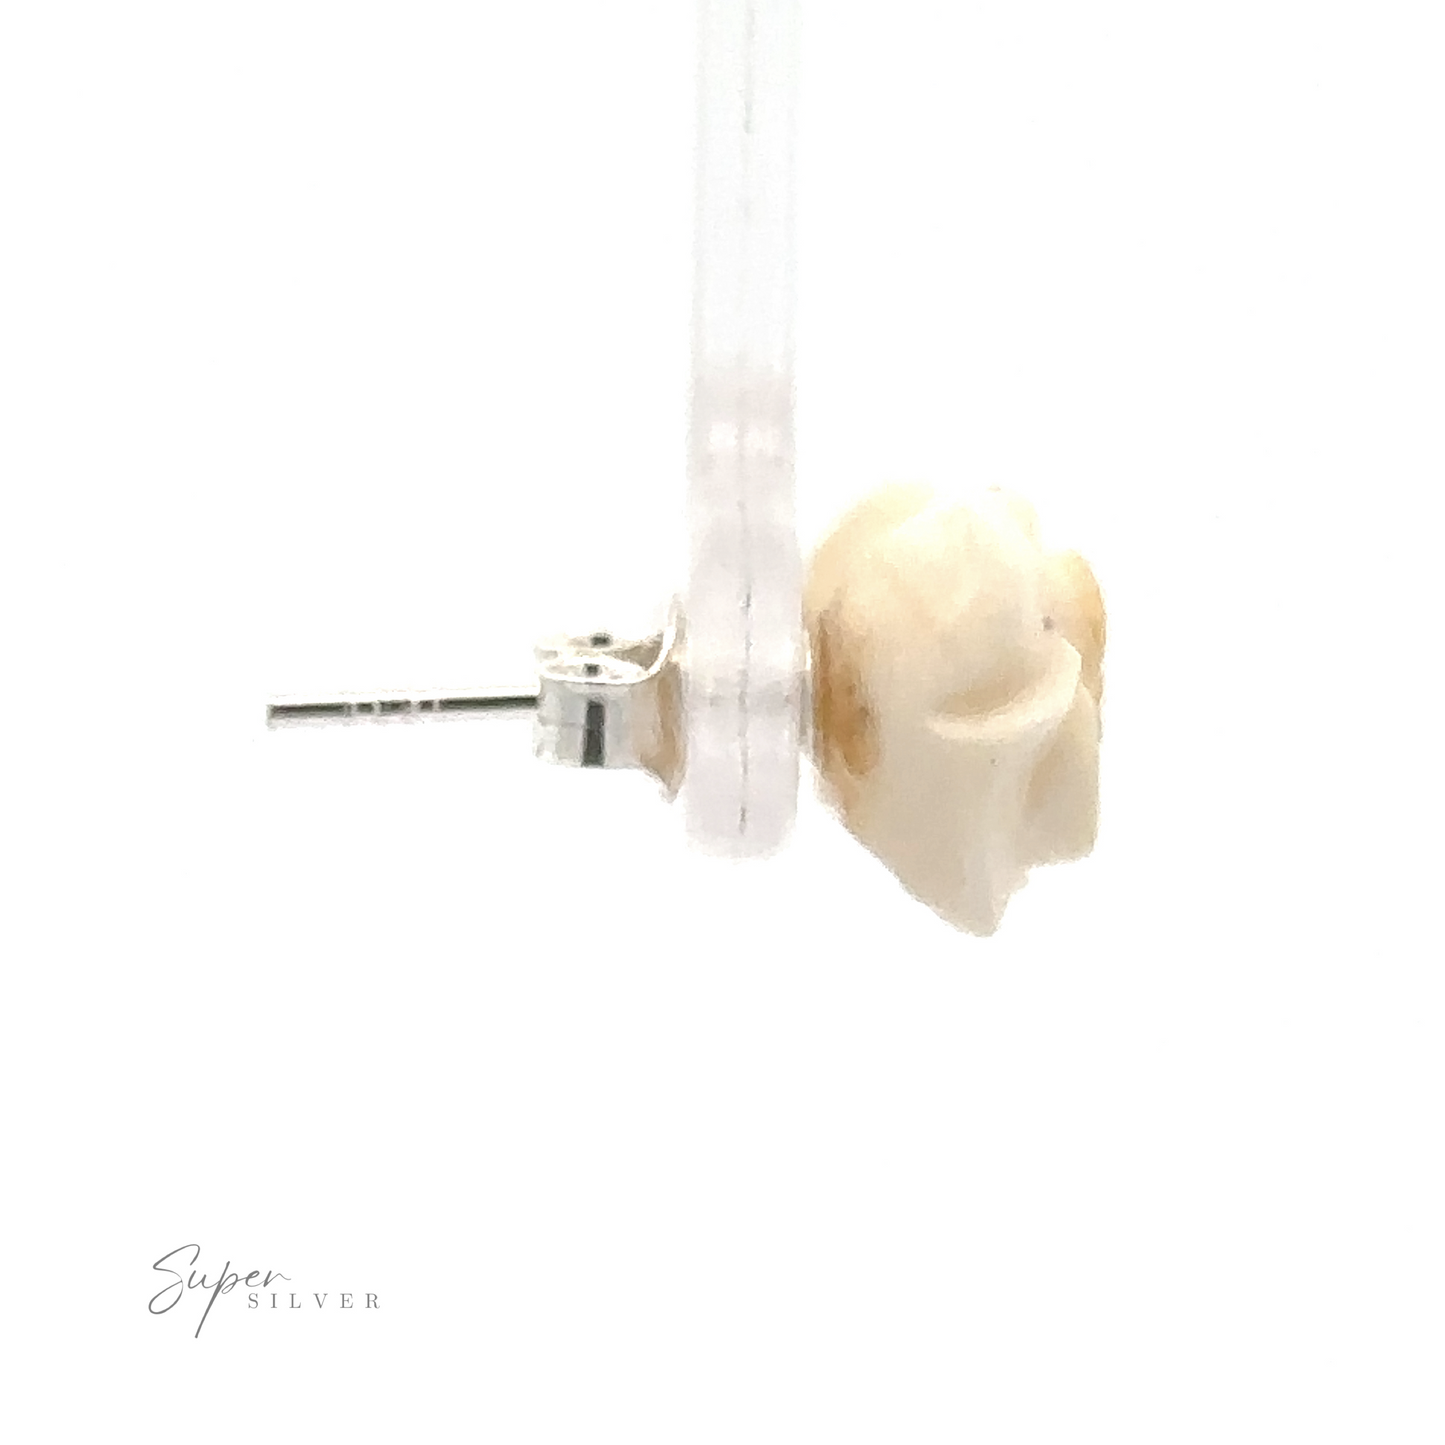 
                  
                    Close-up of a single stud earring with a white rose design, reminiscent of Butterscotch Amber Rose Studs, attached to a transparent stand. The left side includes a pin for fastening. "Super Silver" is written in the bottom left corner, highlighting its quality as part of Sterling Silver Earrings.
                  
                